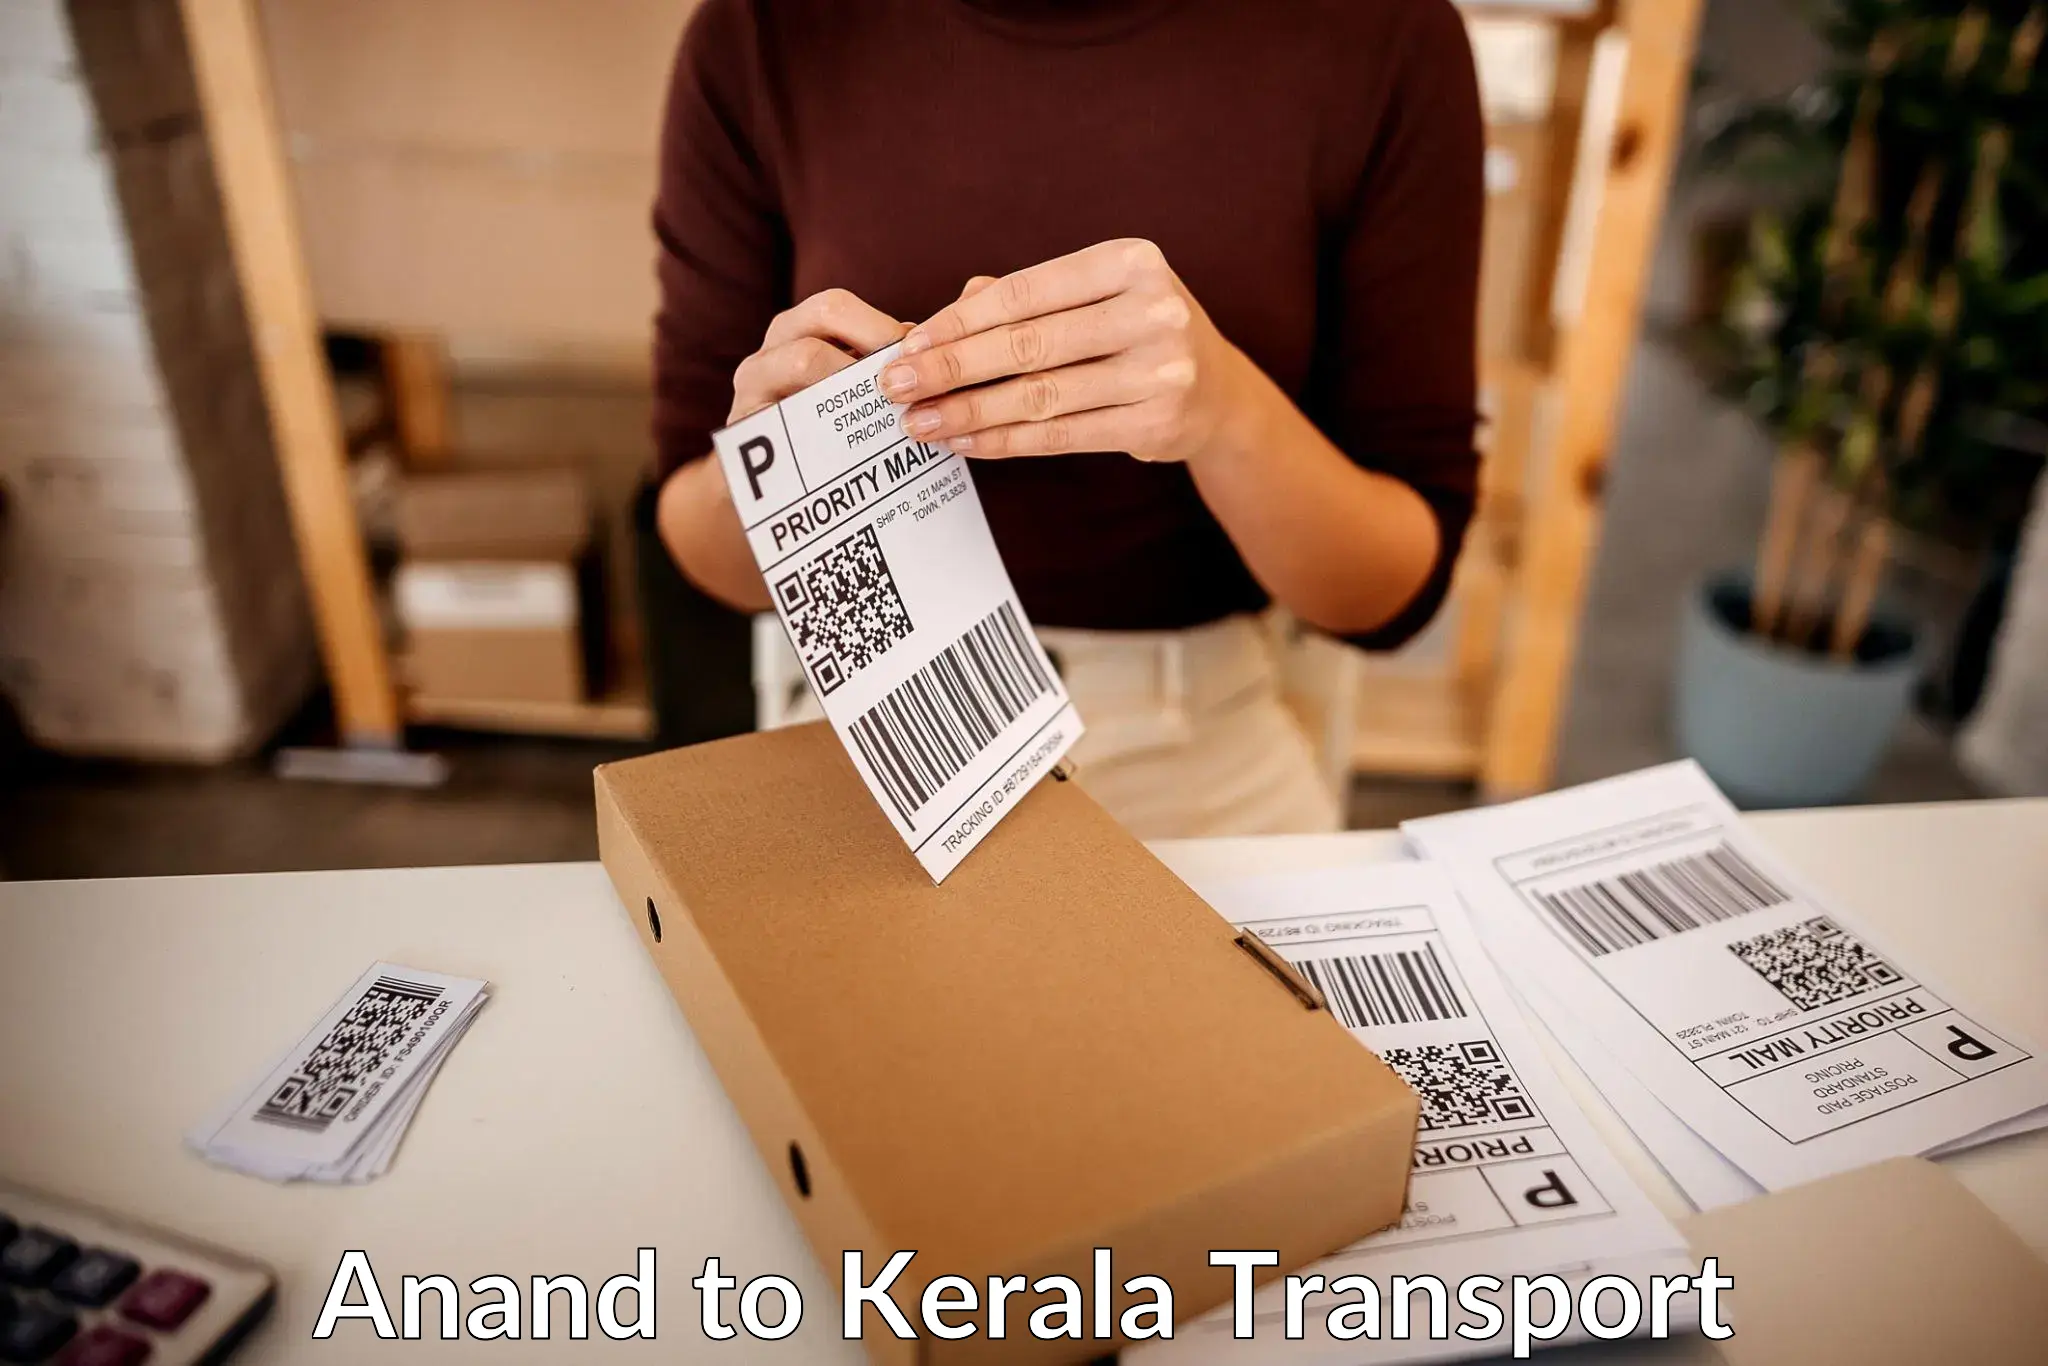 Daily transport service in Anand to Kalpetta